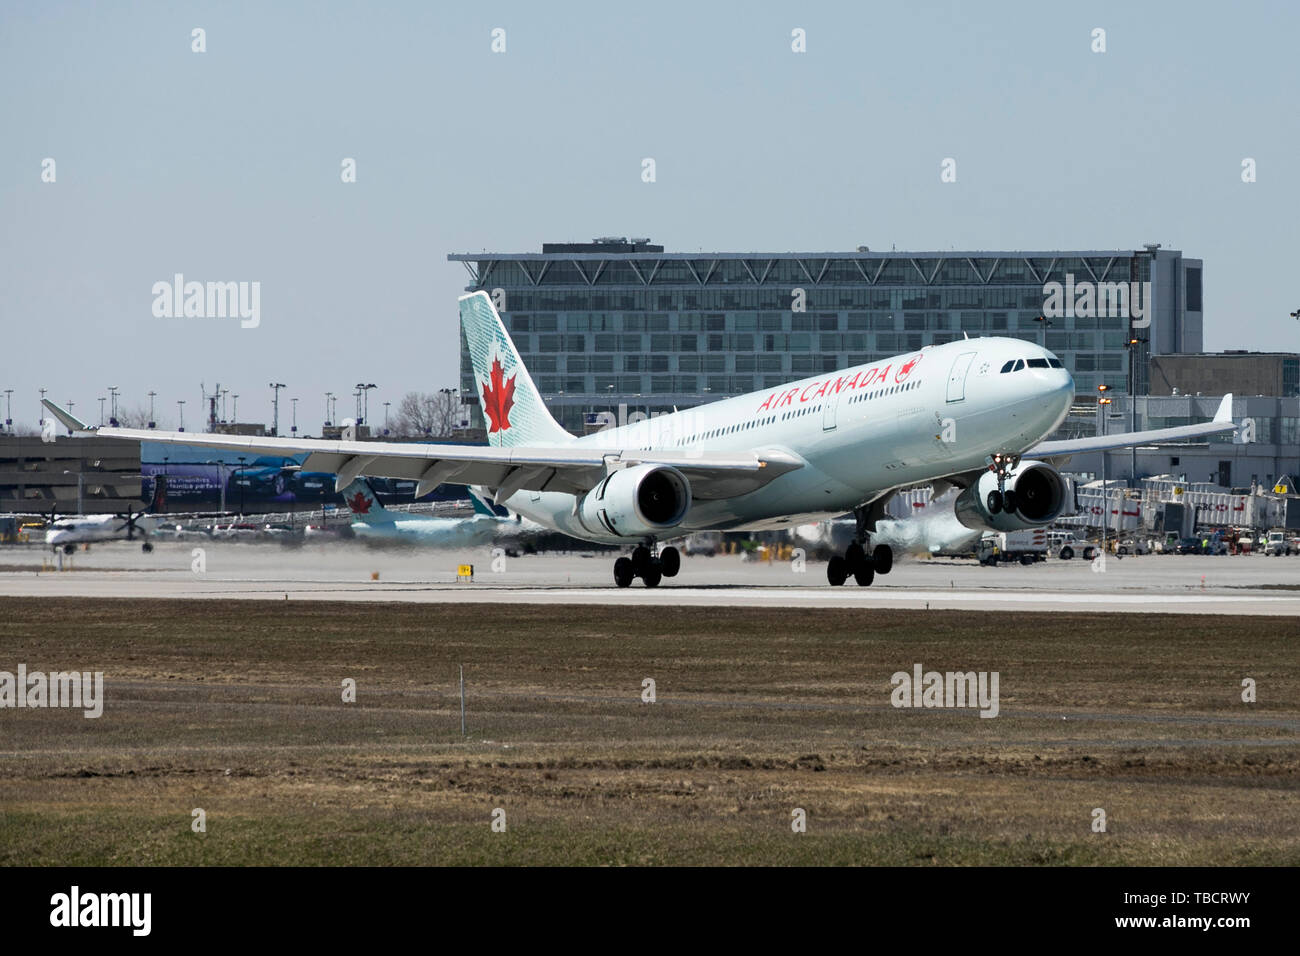 A Air Canada Airbus A330 airplane is seen landing at Montréal-Pierre Elliott Trudeau International Airport in Montreal, Quebec, Canada, on April 22, 2 Stock Photo